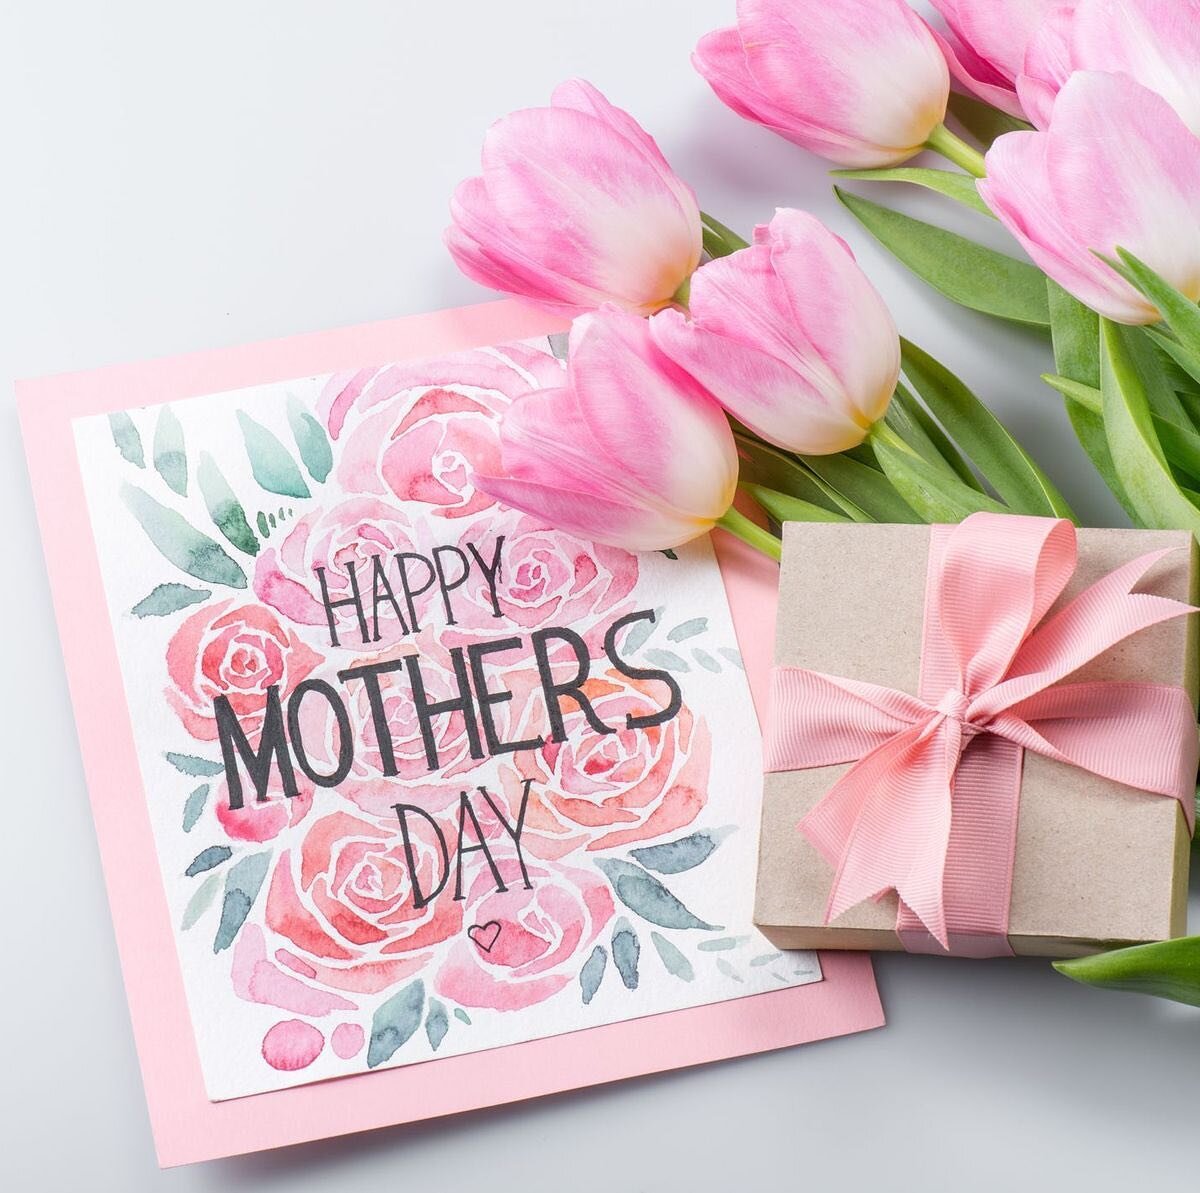 Happy Mother&rsquo;s Day from Janey&rsquo;s at 2500!! #mothersday #happymothersday #janeysat2500 #janeys #shoplocalamarillo #amarillotx #supportlocalbusiness #shoplocal #amarilloshopping #amarilloboutiques #boutiqueshopping